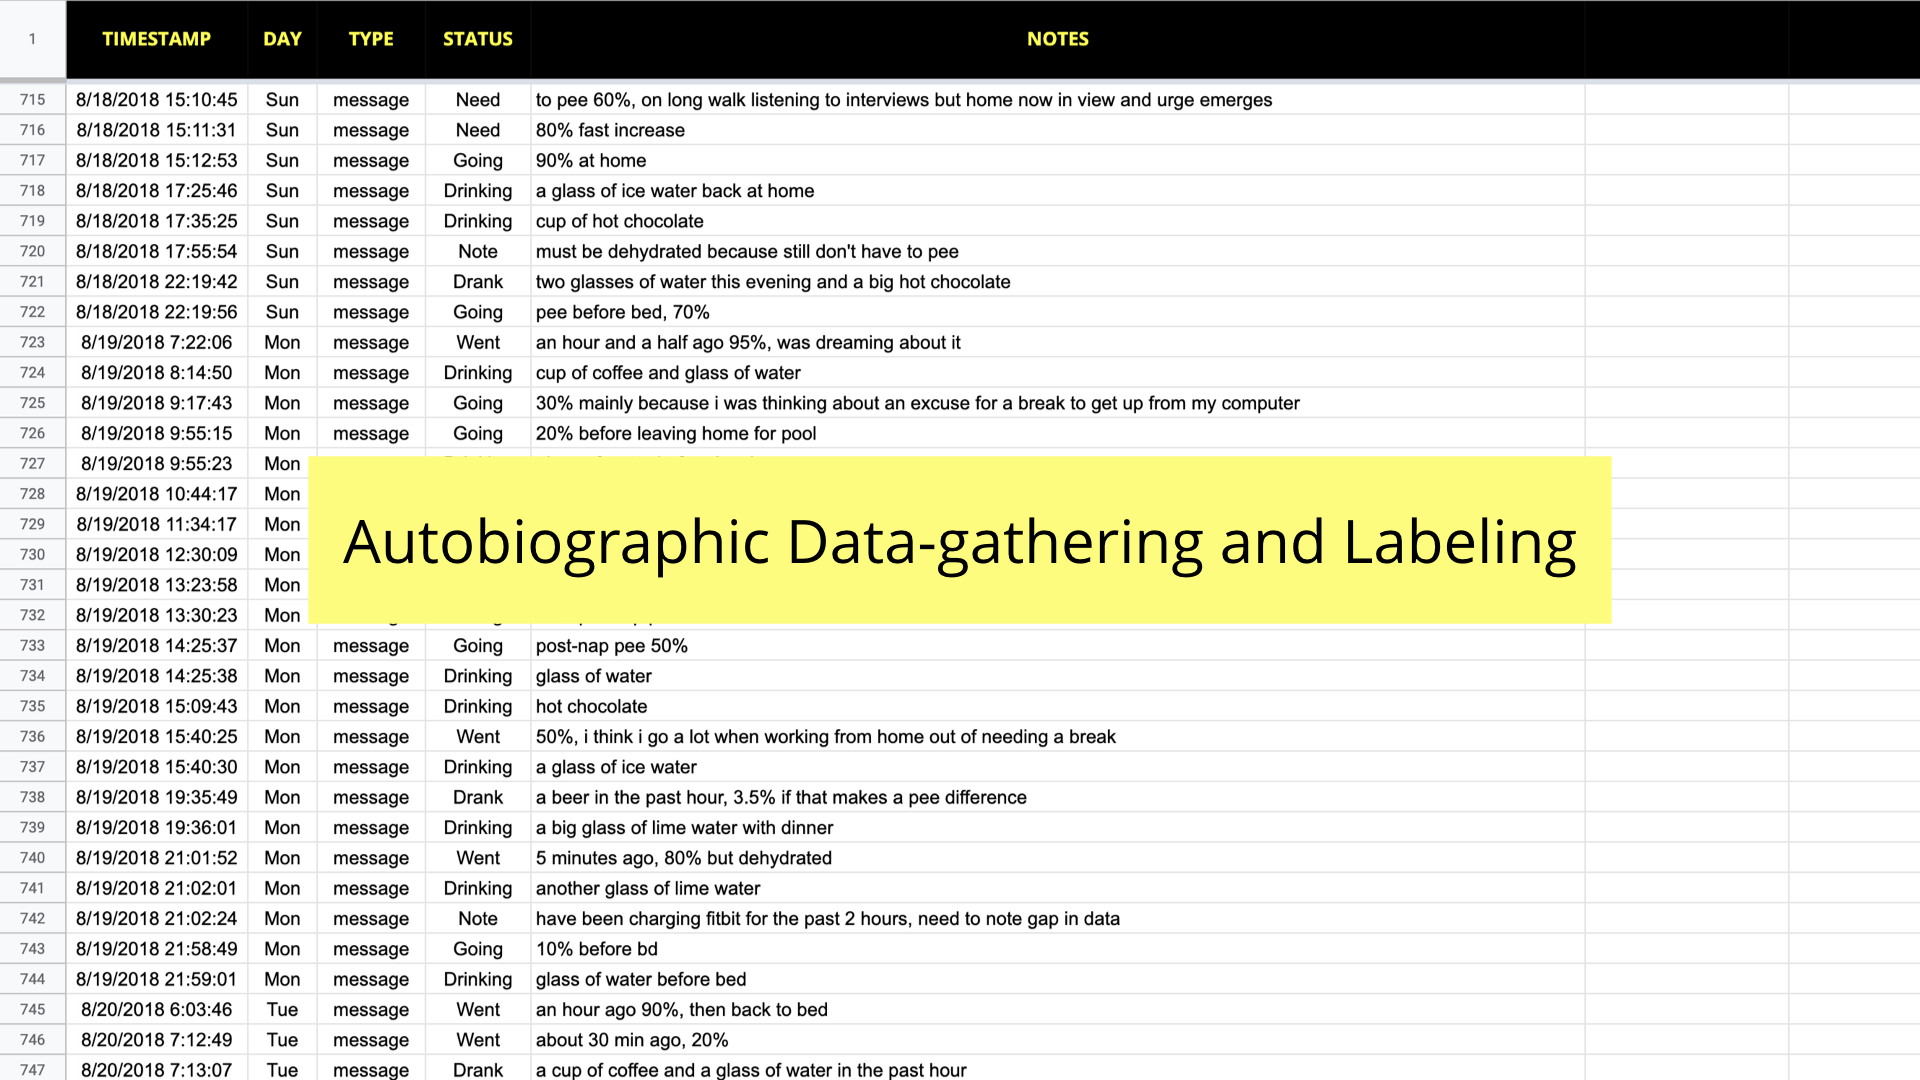 DIS 2019 paper presentation - Autobiographic data-gathering and labeling